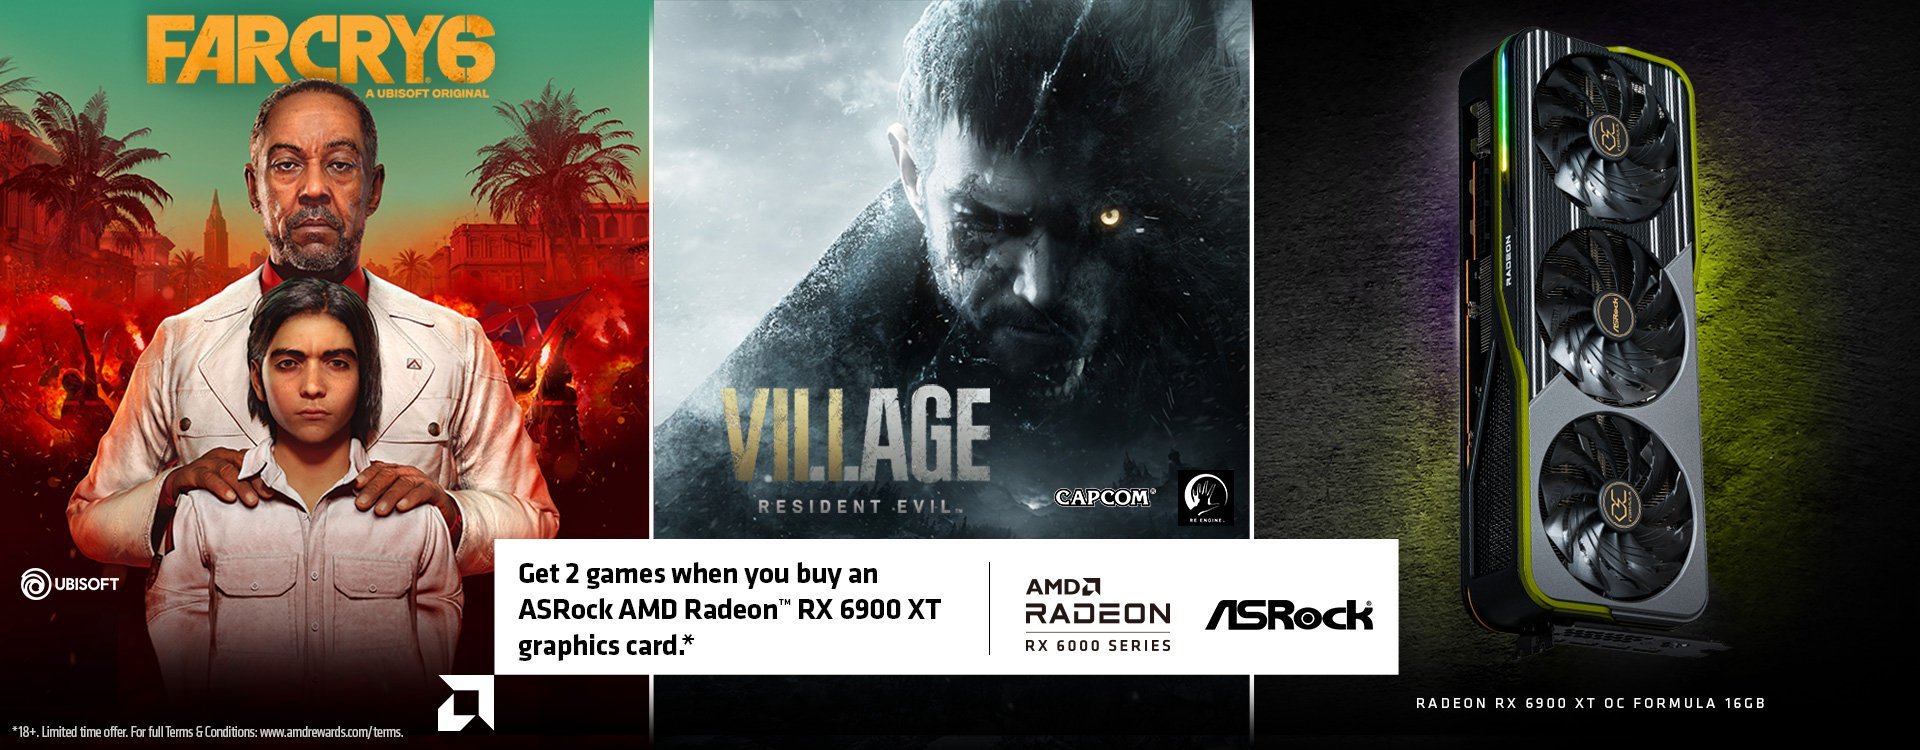 Get 2 games when you buy an ASRock AMD Radeon RX 6900 XT graphics card 